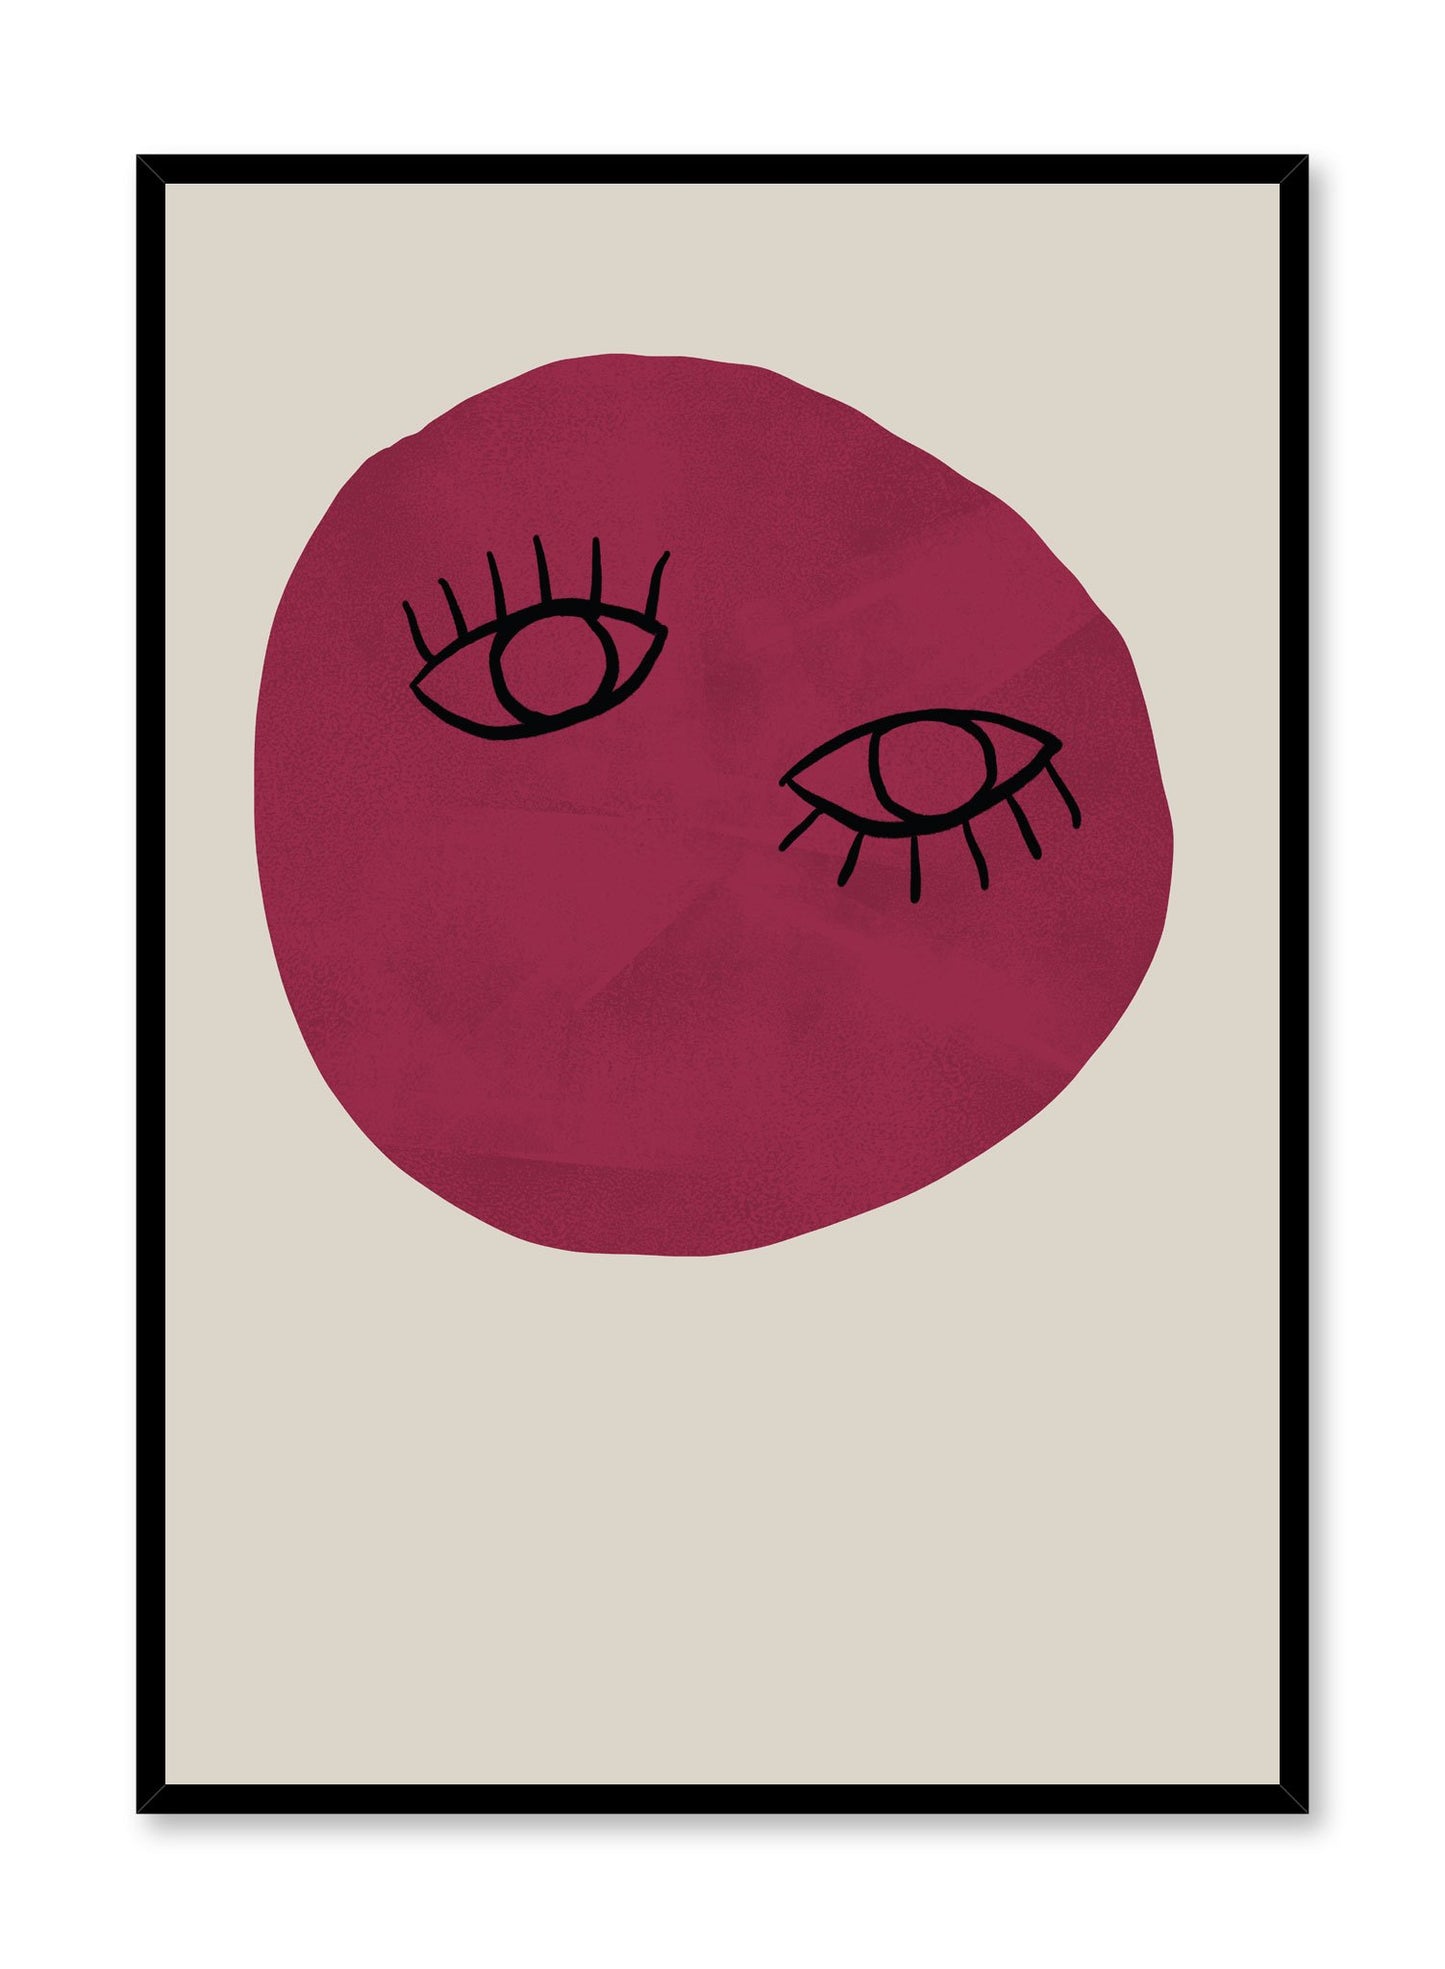 Modern minimalist poster by Opposite Wall with abstract design poster of Unconventional Beauty by Toffie Affichiste